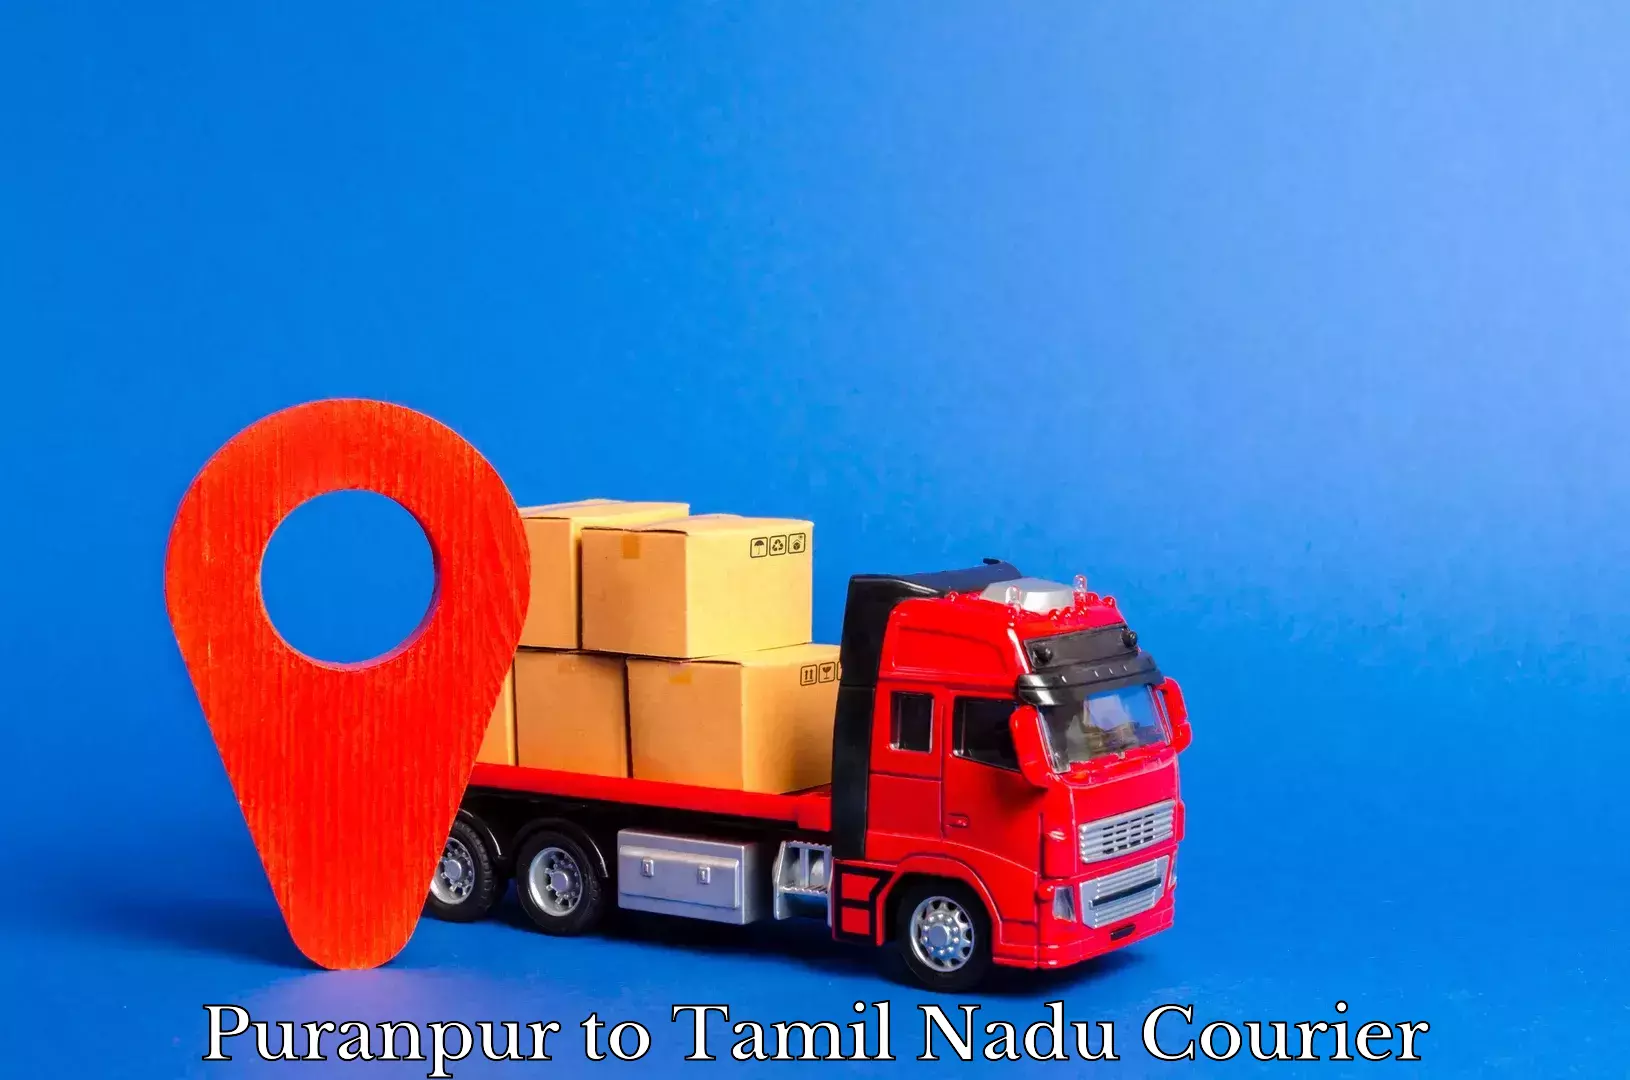 Nationwide shipping coverage Puranpur to Tamil Nadu